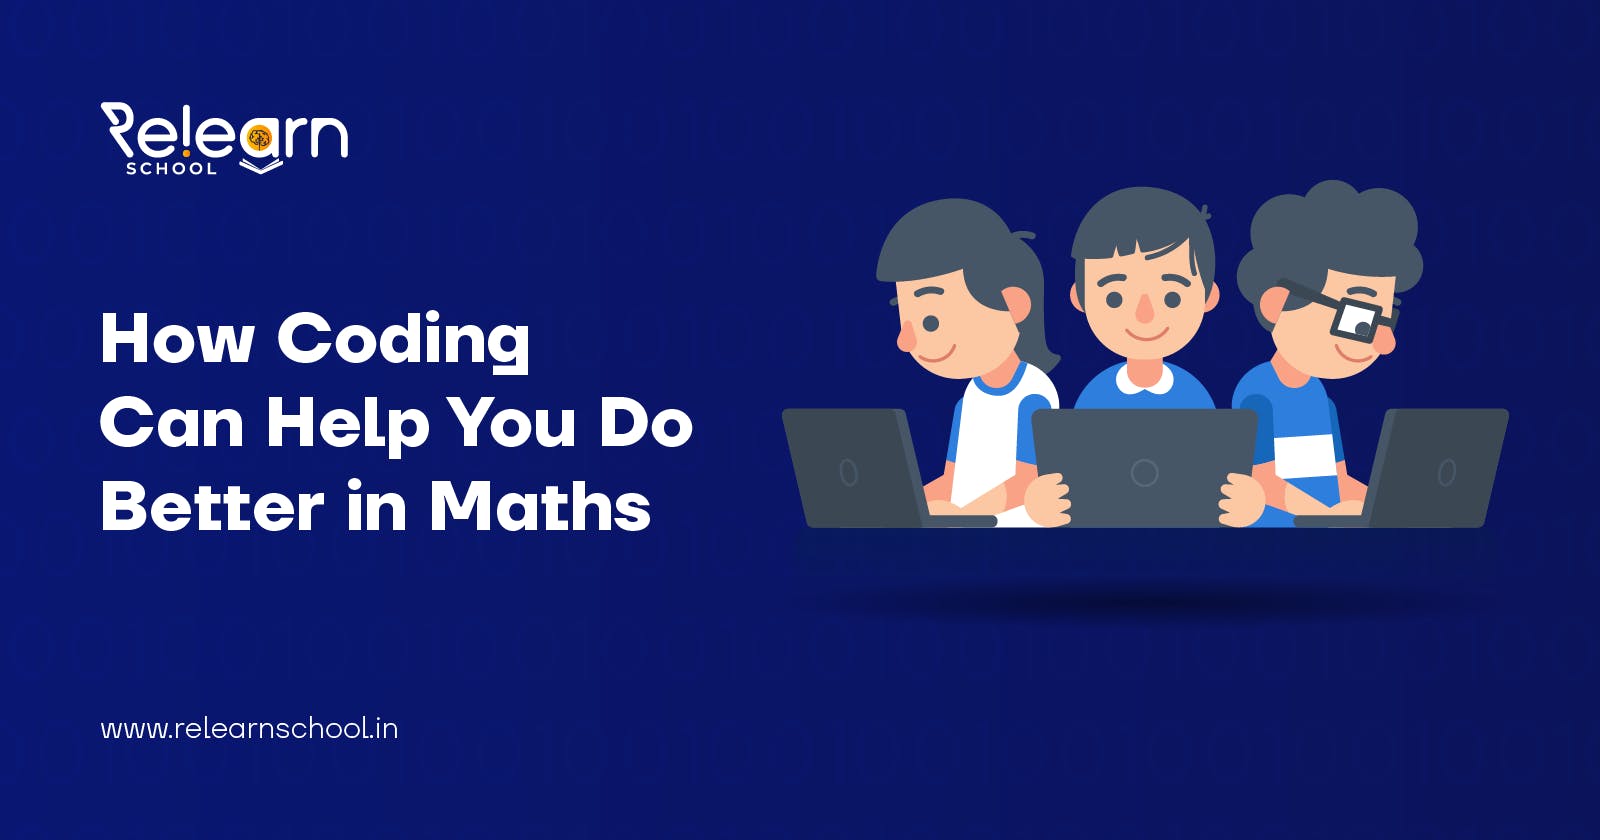 How Coding Can Help You Do Better in Maths